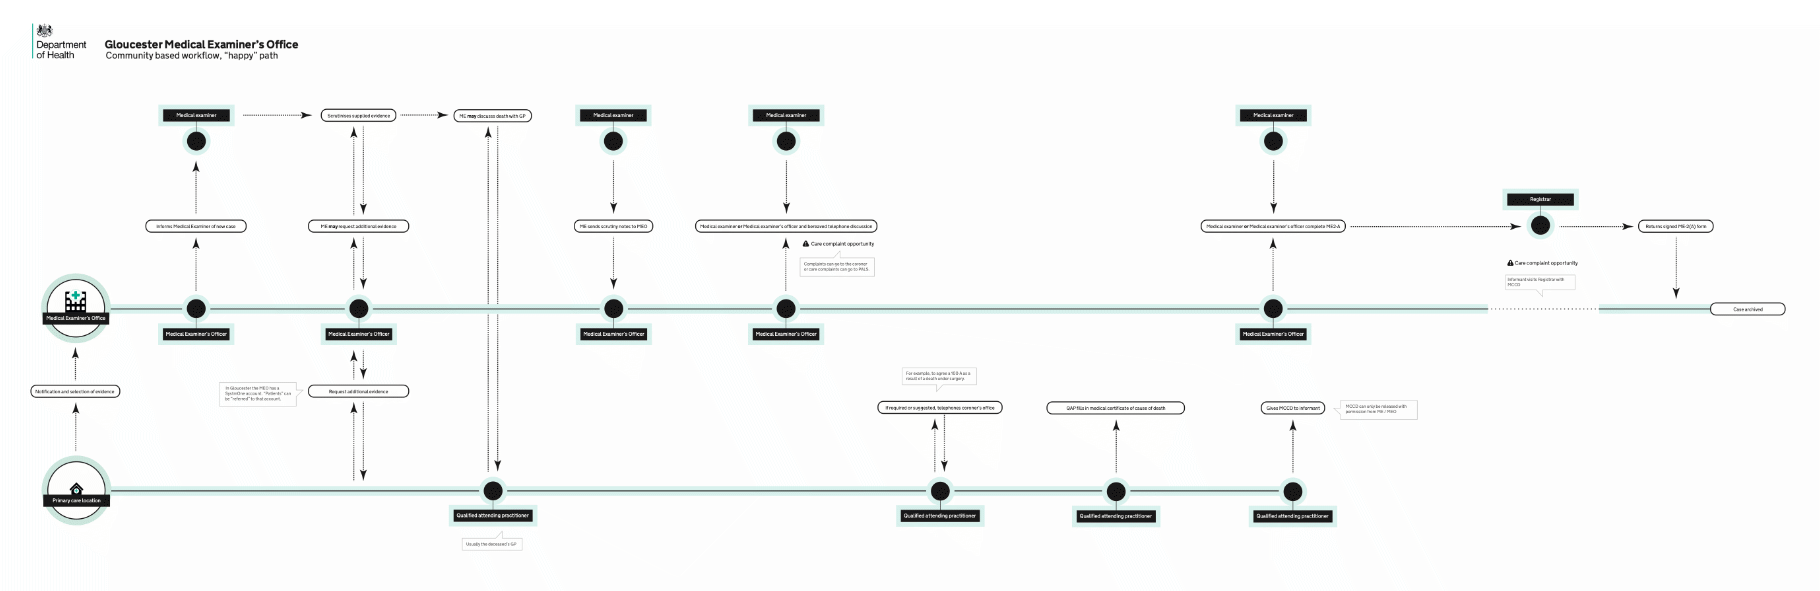 Workflow map for a death in the community in Gloucester